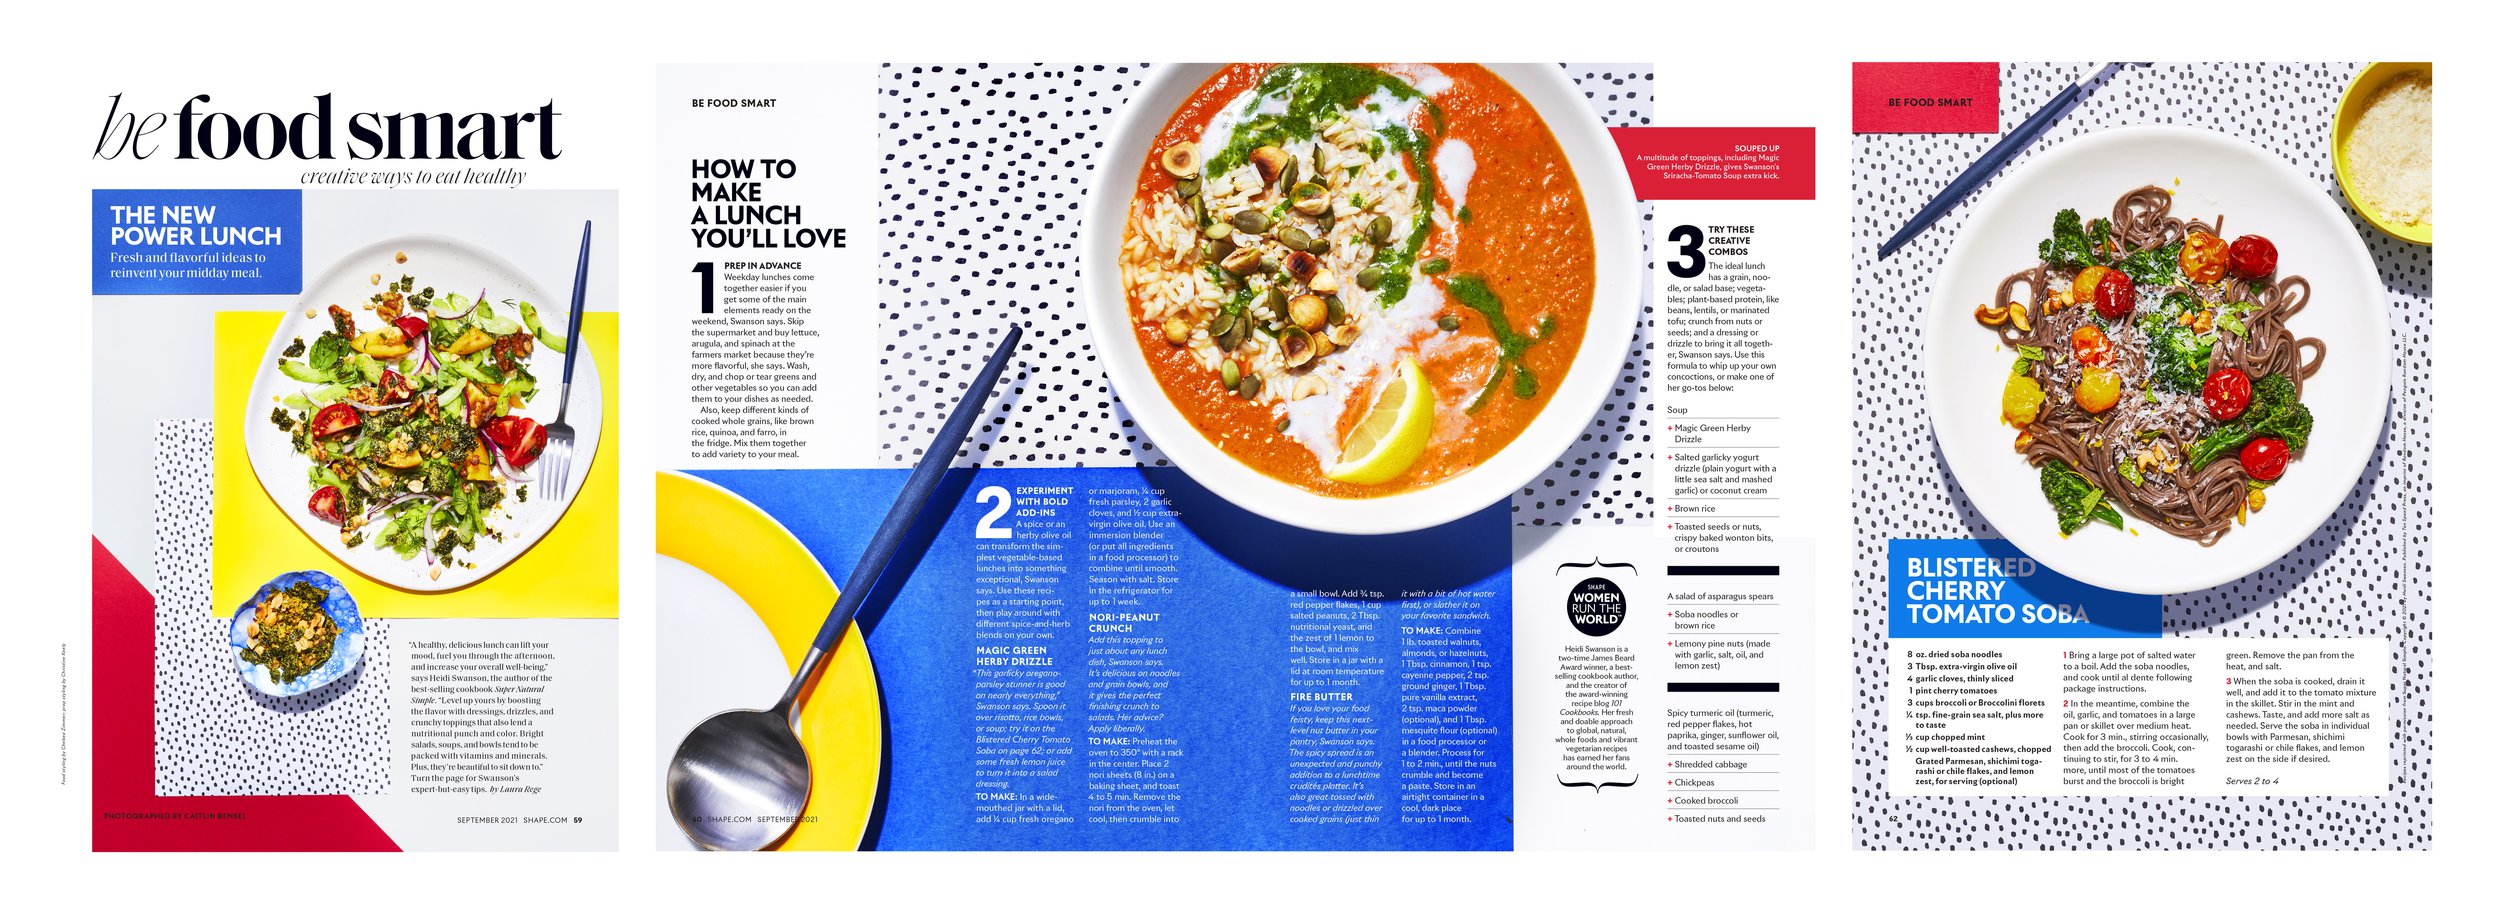 Final Photos and Layout: Moodboard: Food Smart Feature- The New Power of Lunch